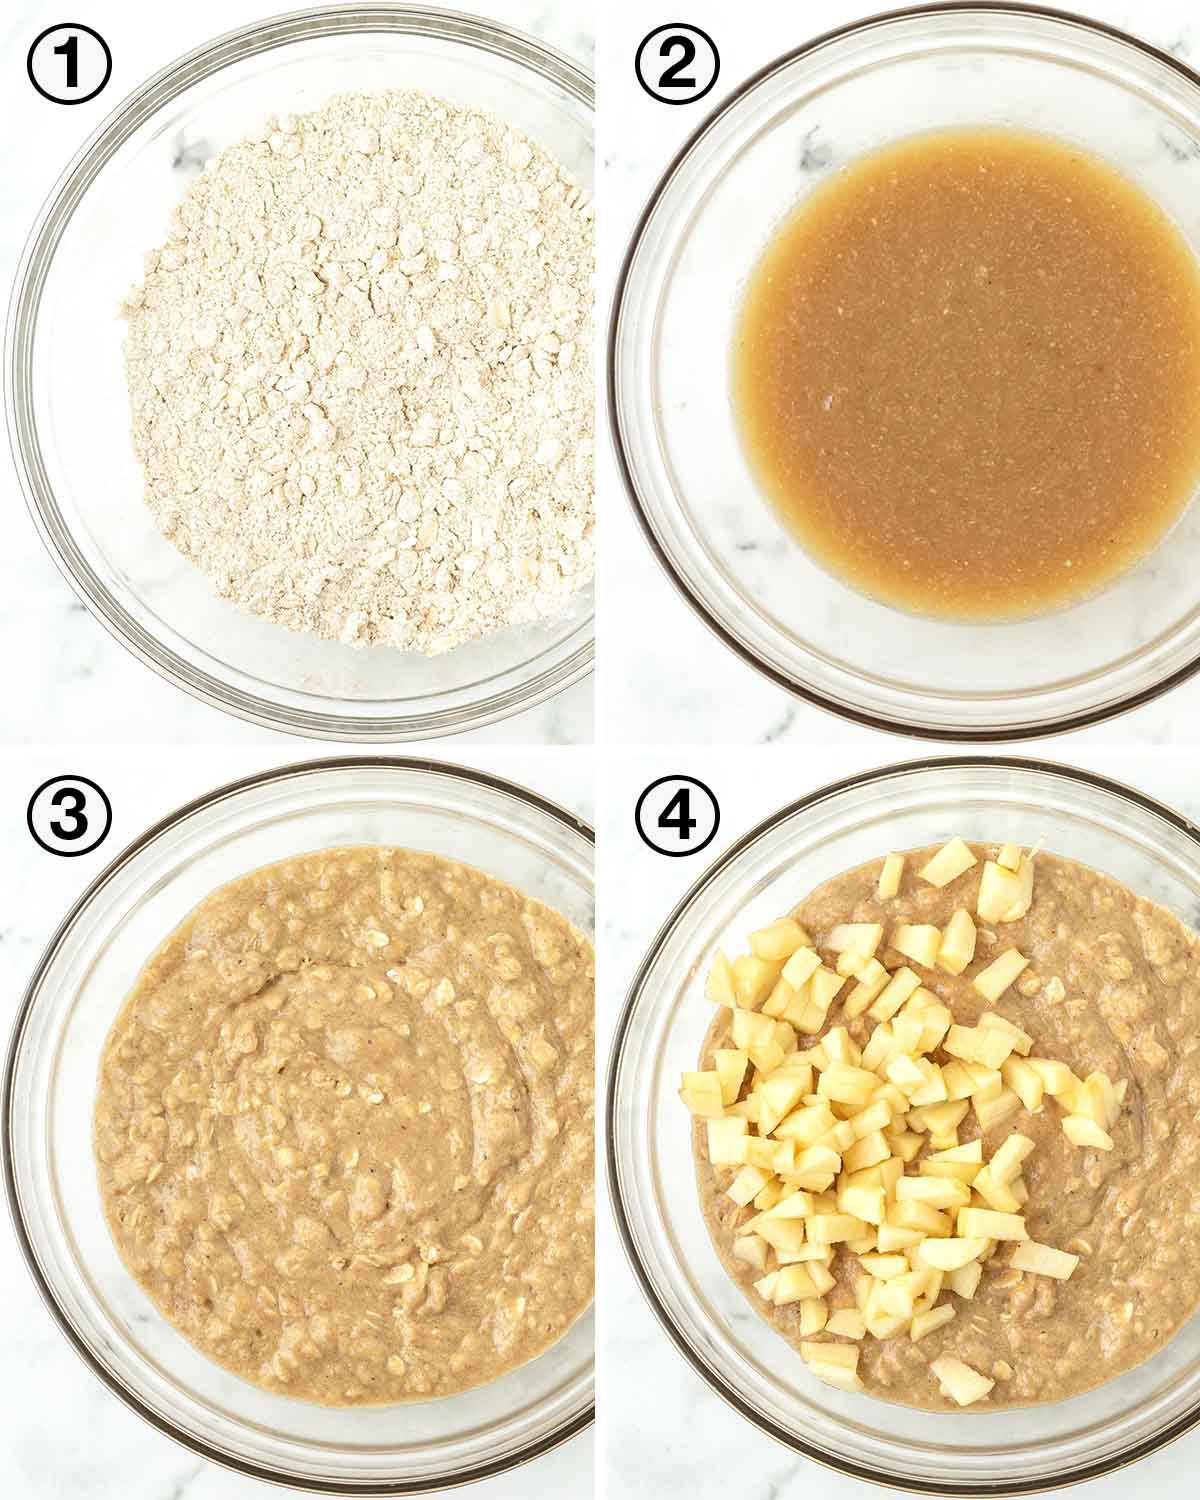 A collage of four images showing the first sequence of steps needed to make vegan apple oatmeal muffins.